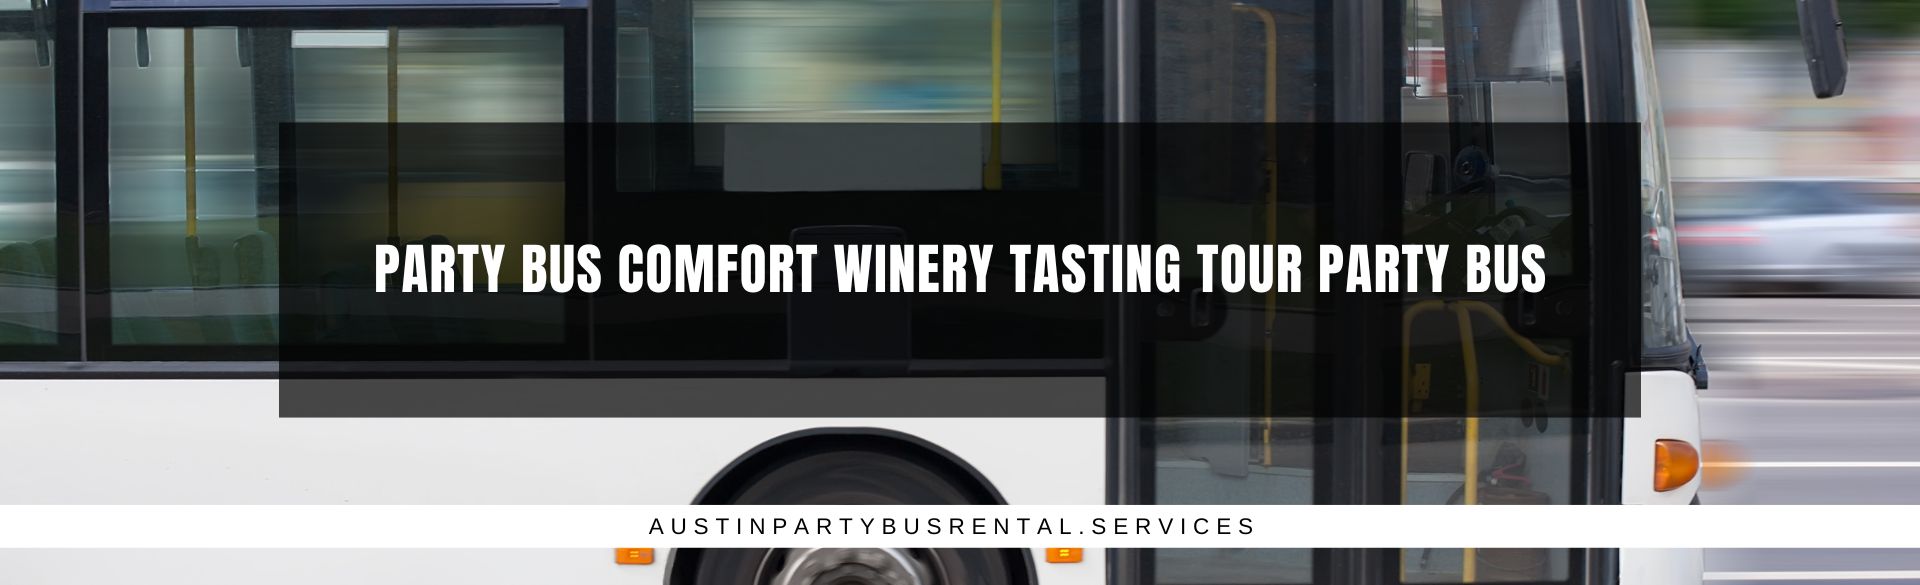 Party Bus Comfort Winery Tasting Tour Party Bus